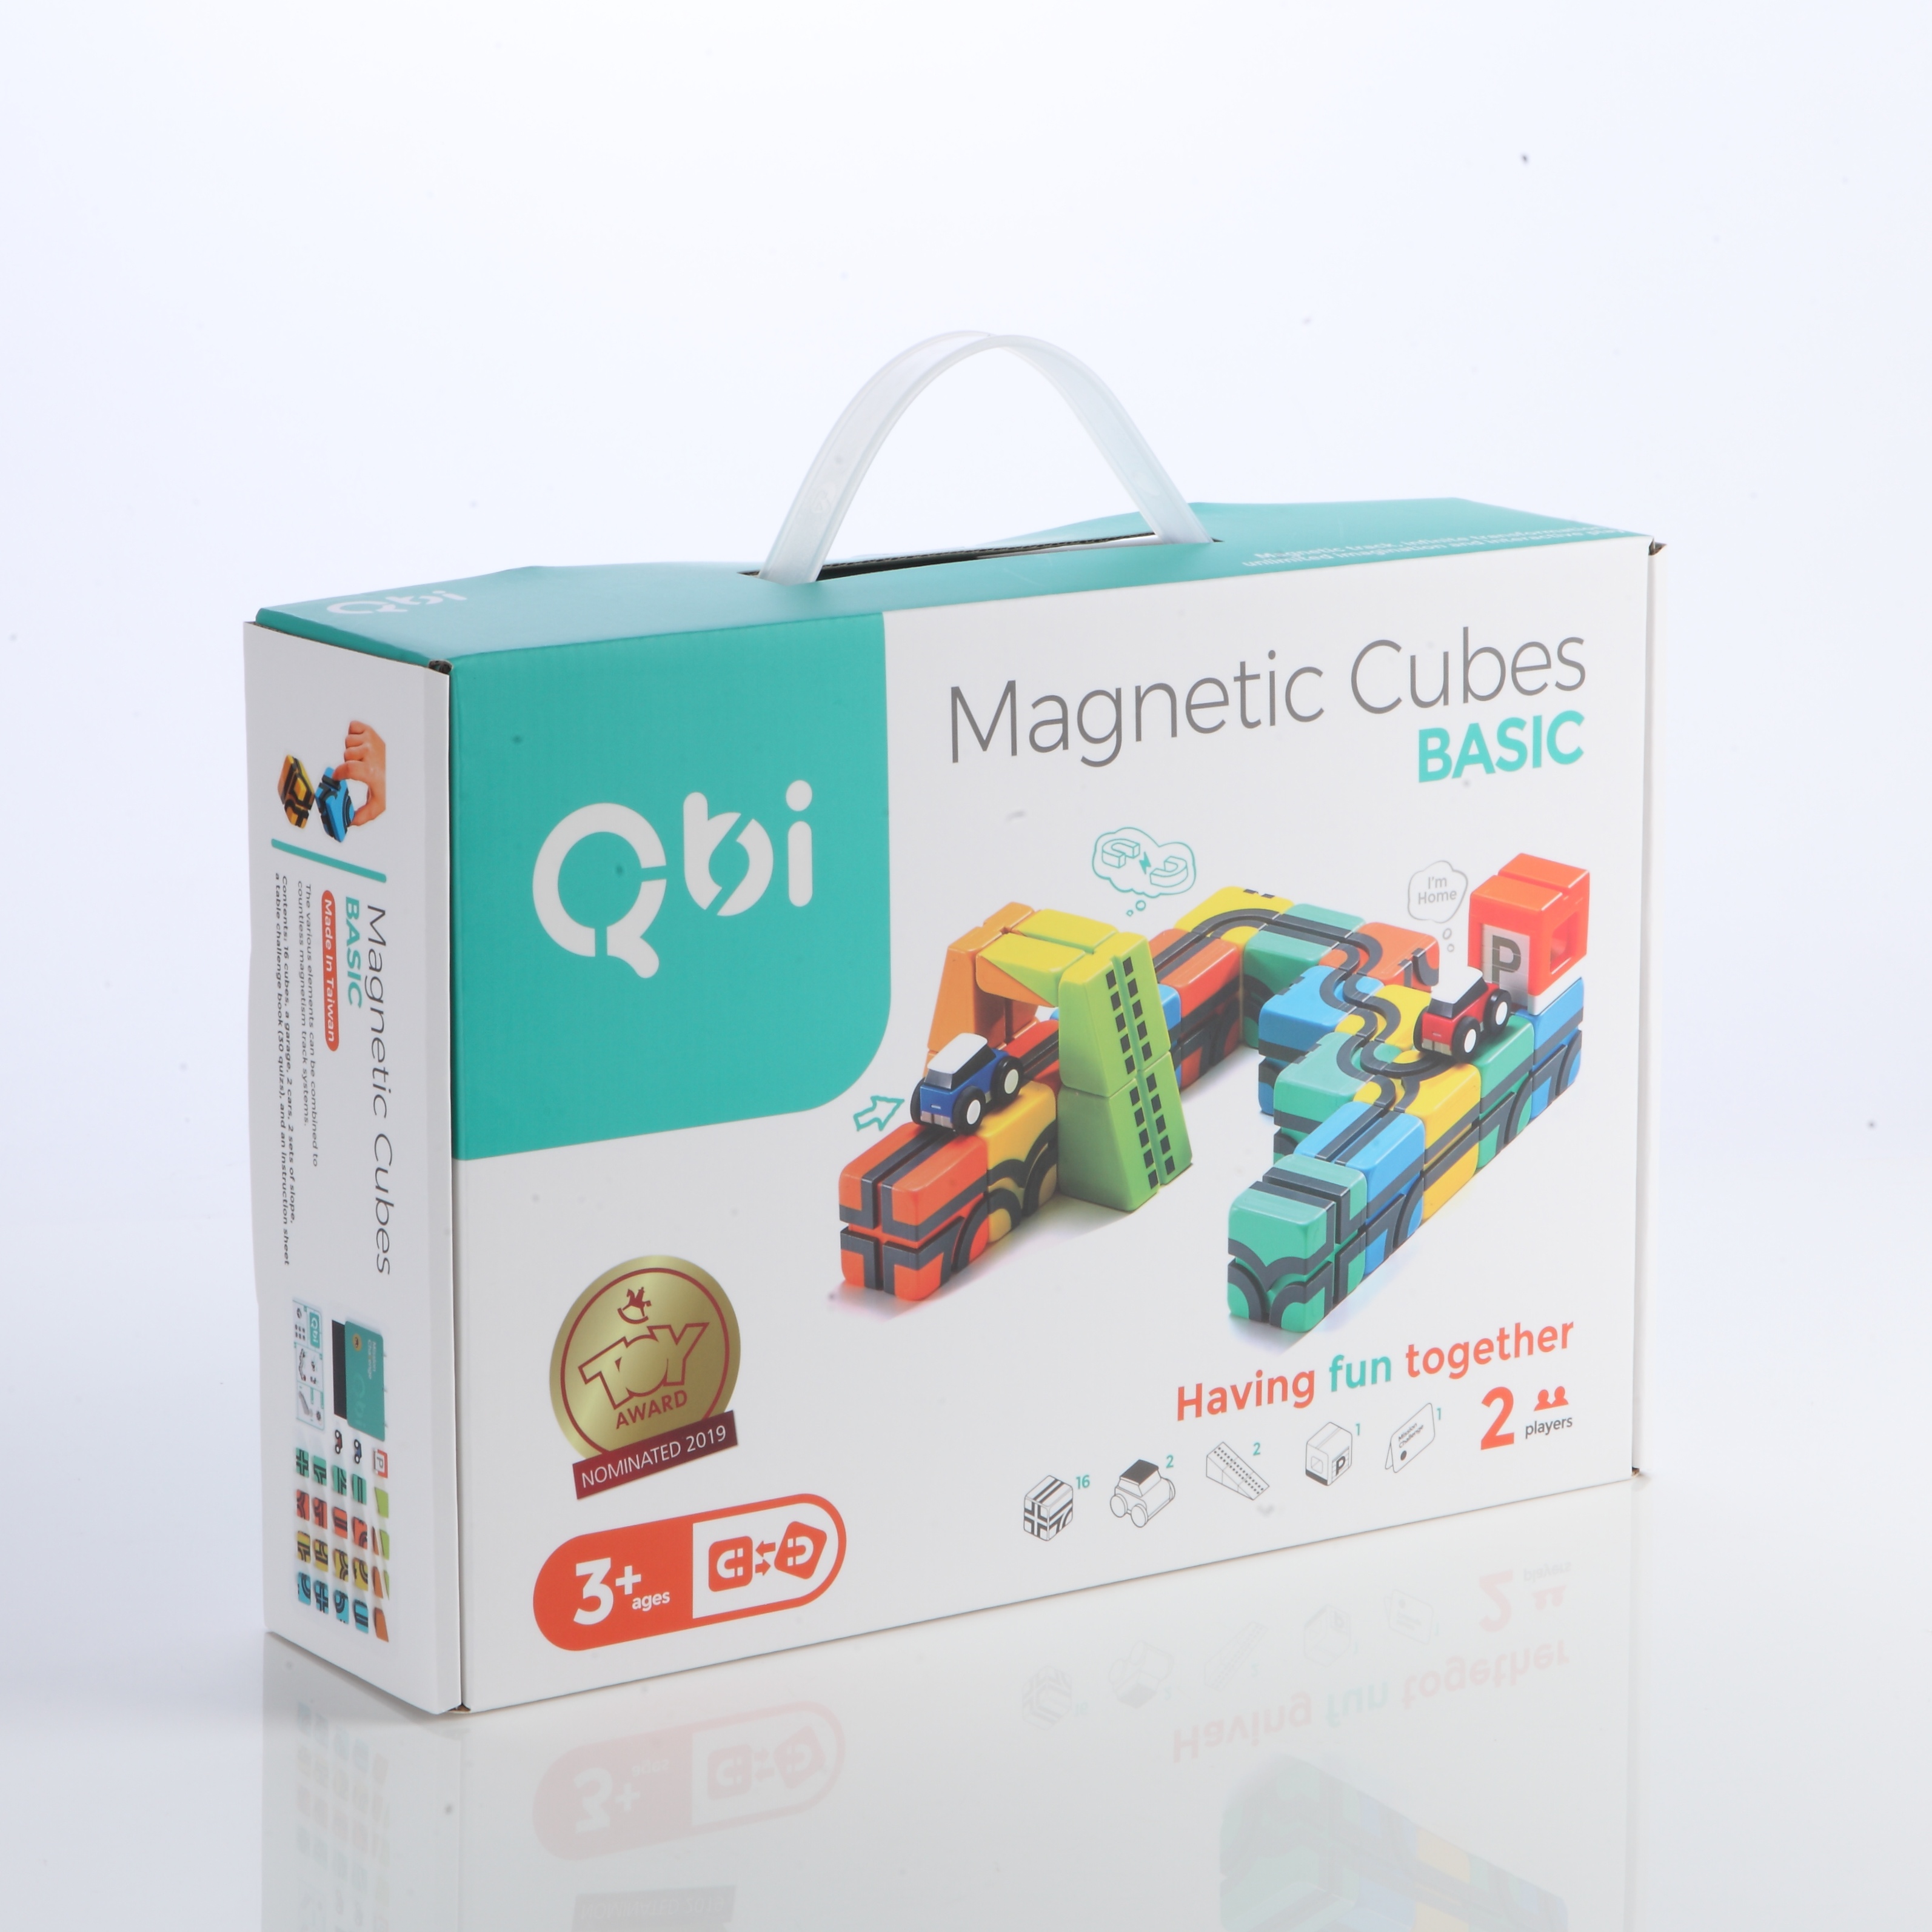 Qbi Magnetic Cubes Classic - Basic Pack | Taiwantrade